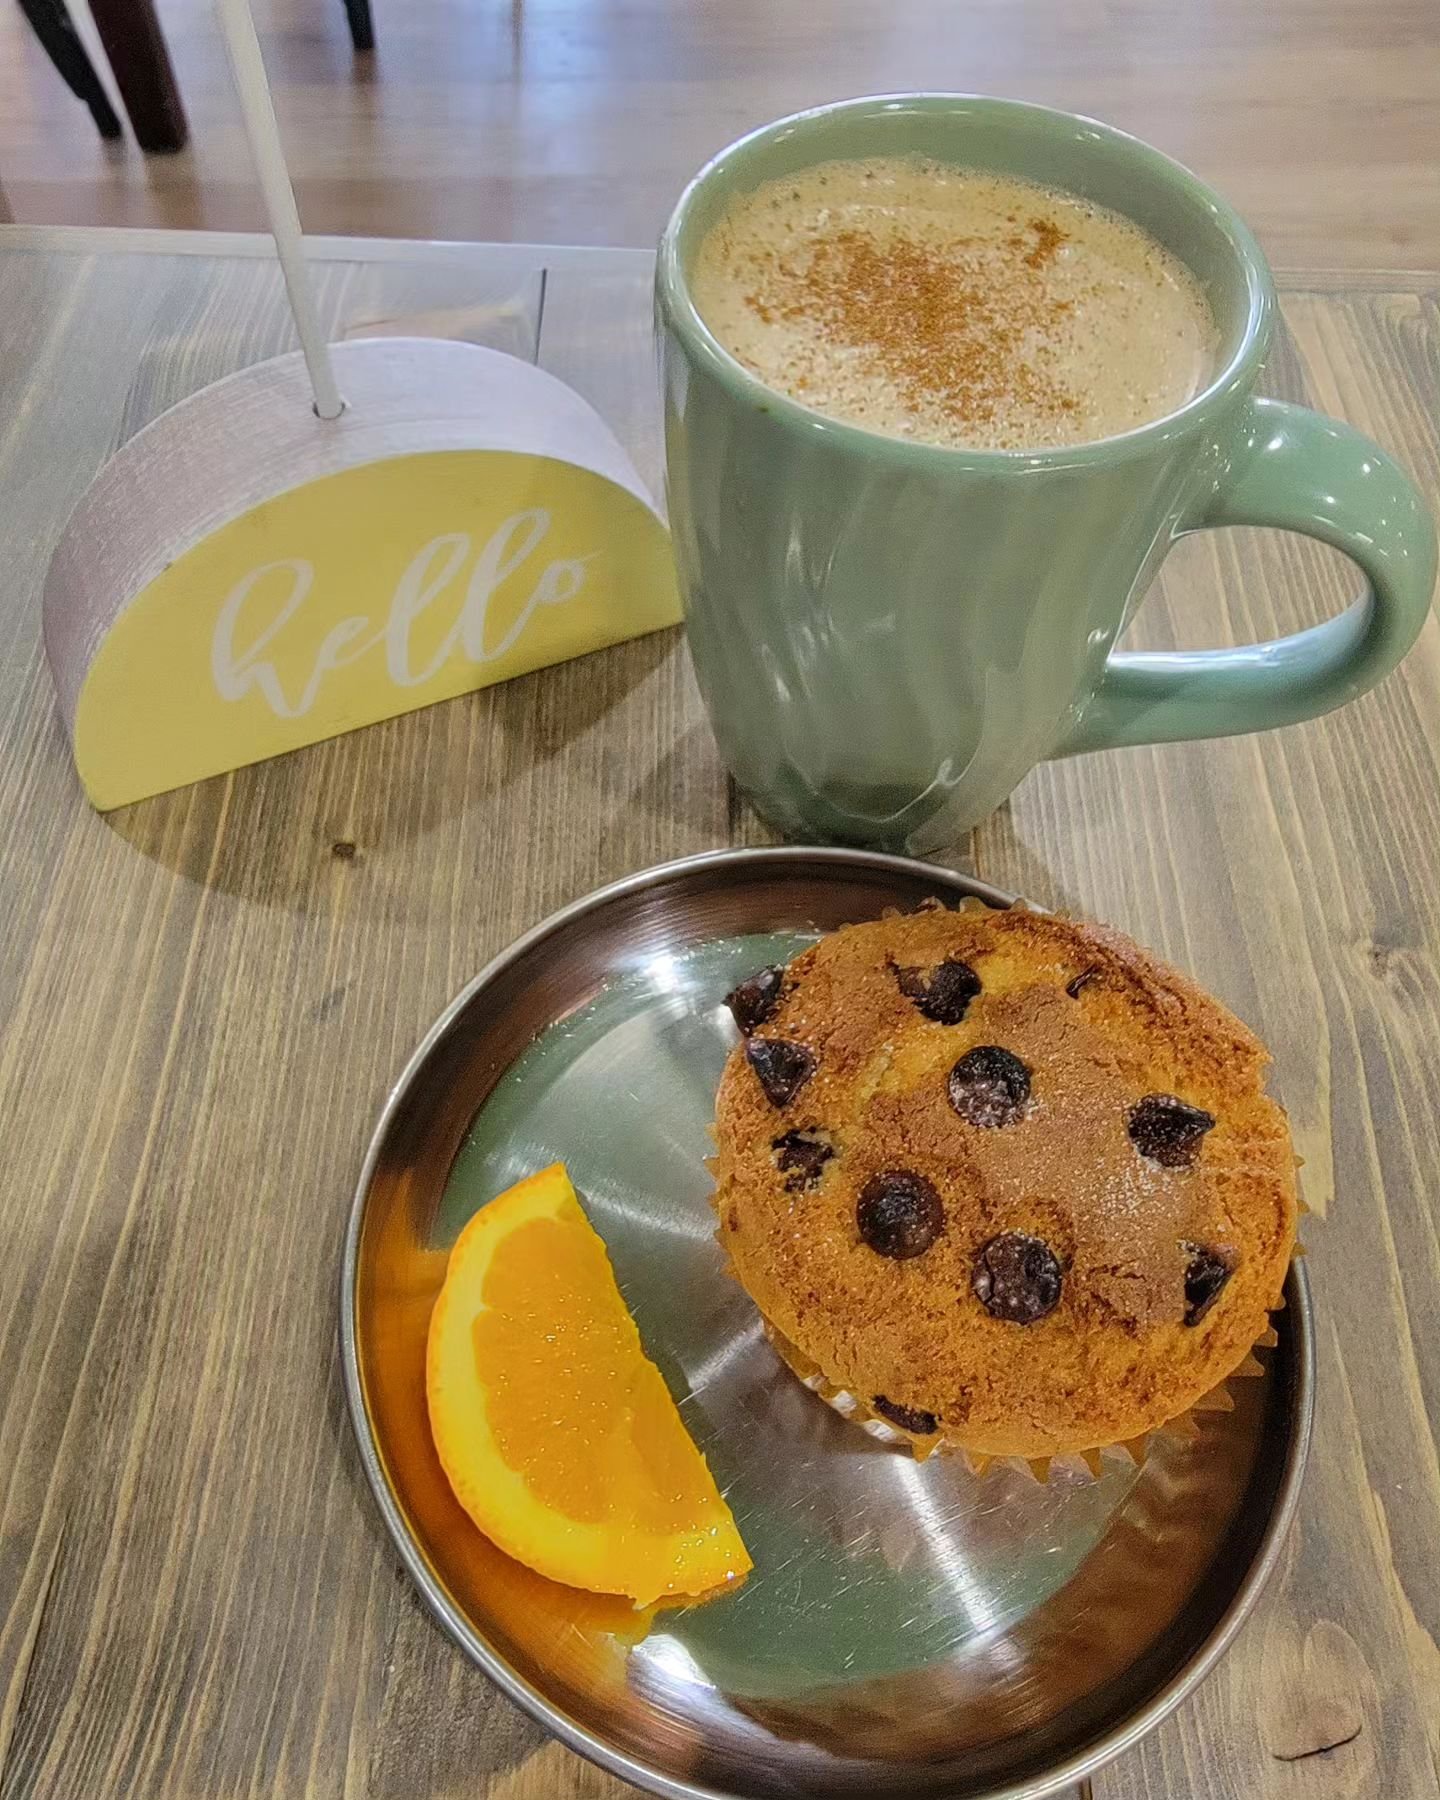 Honey Cinnamon Latte with Homemade Chocolate Chip Muffin made by Ally!! @flute_guurl_225 ♡♡♡ #createyourownlatte #noaspartame #treehousecafecos #communitycafe